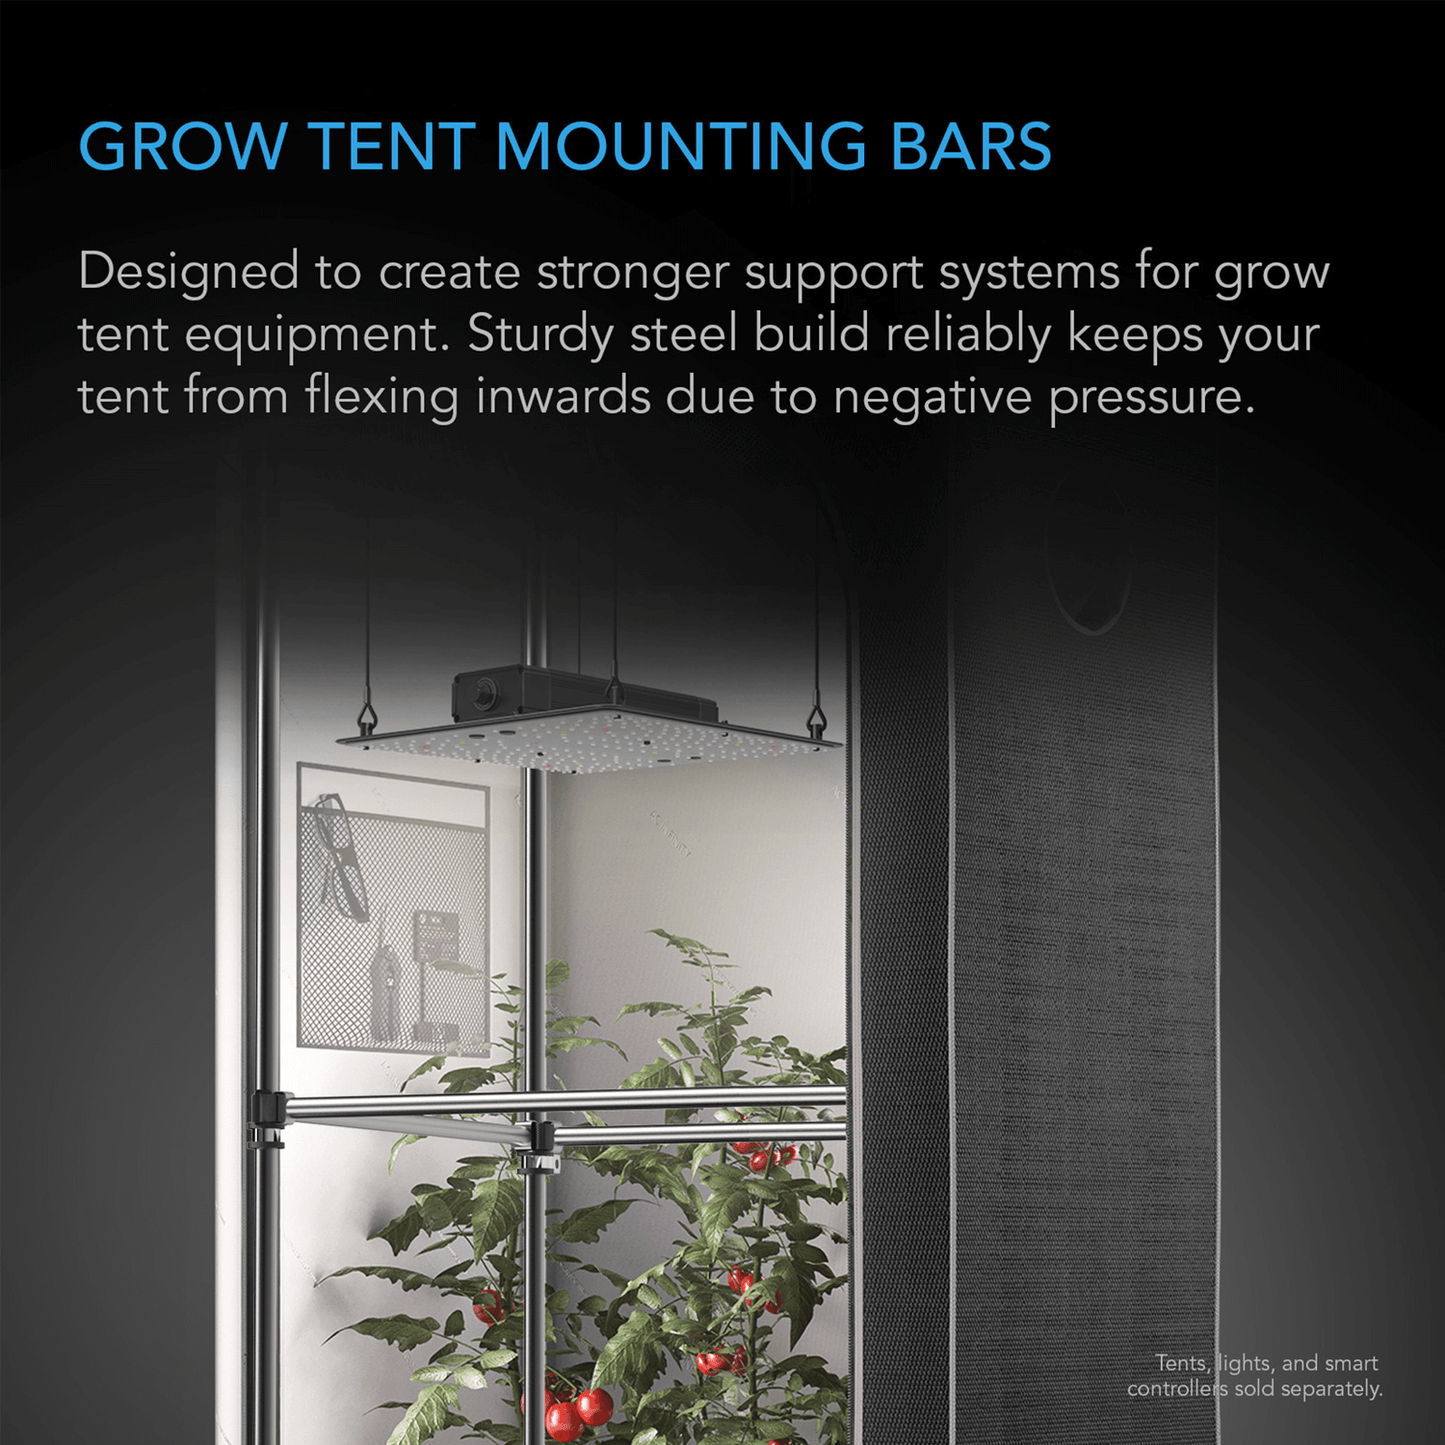 AC Infinity Grow Tent Mounting Bars, for Indoor Grow Spaces, 3x3' AC-HCA33 Grow Tents